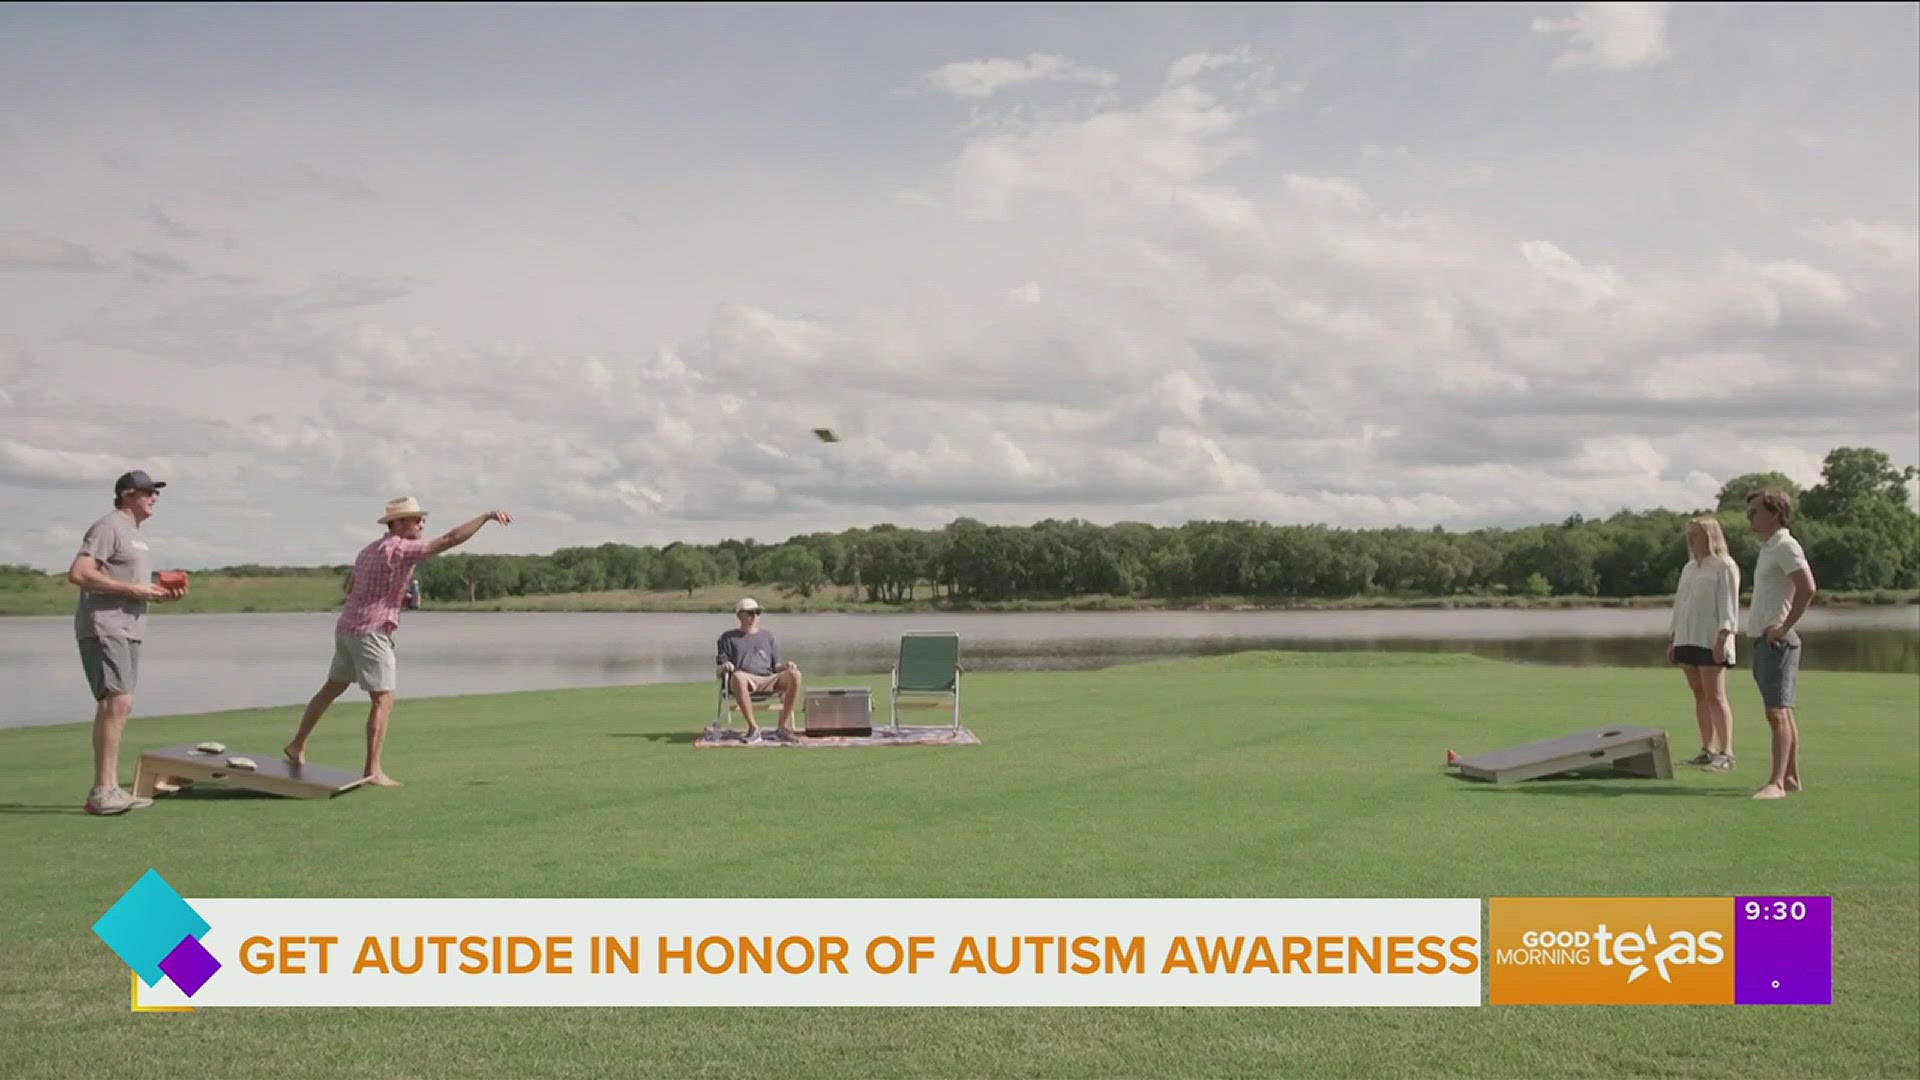 In honor of Autism Acceptance Month, we're going "Aut-side" for fun and games.